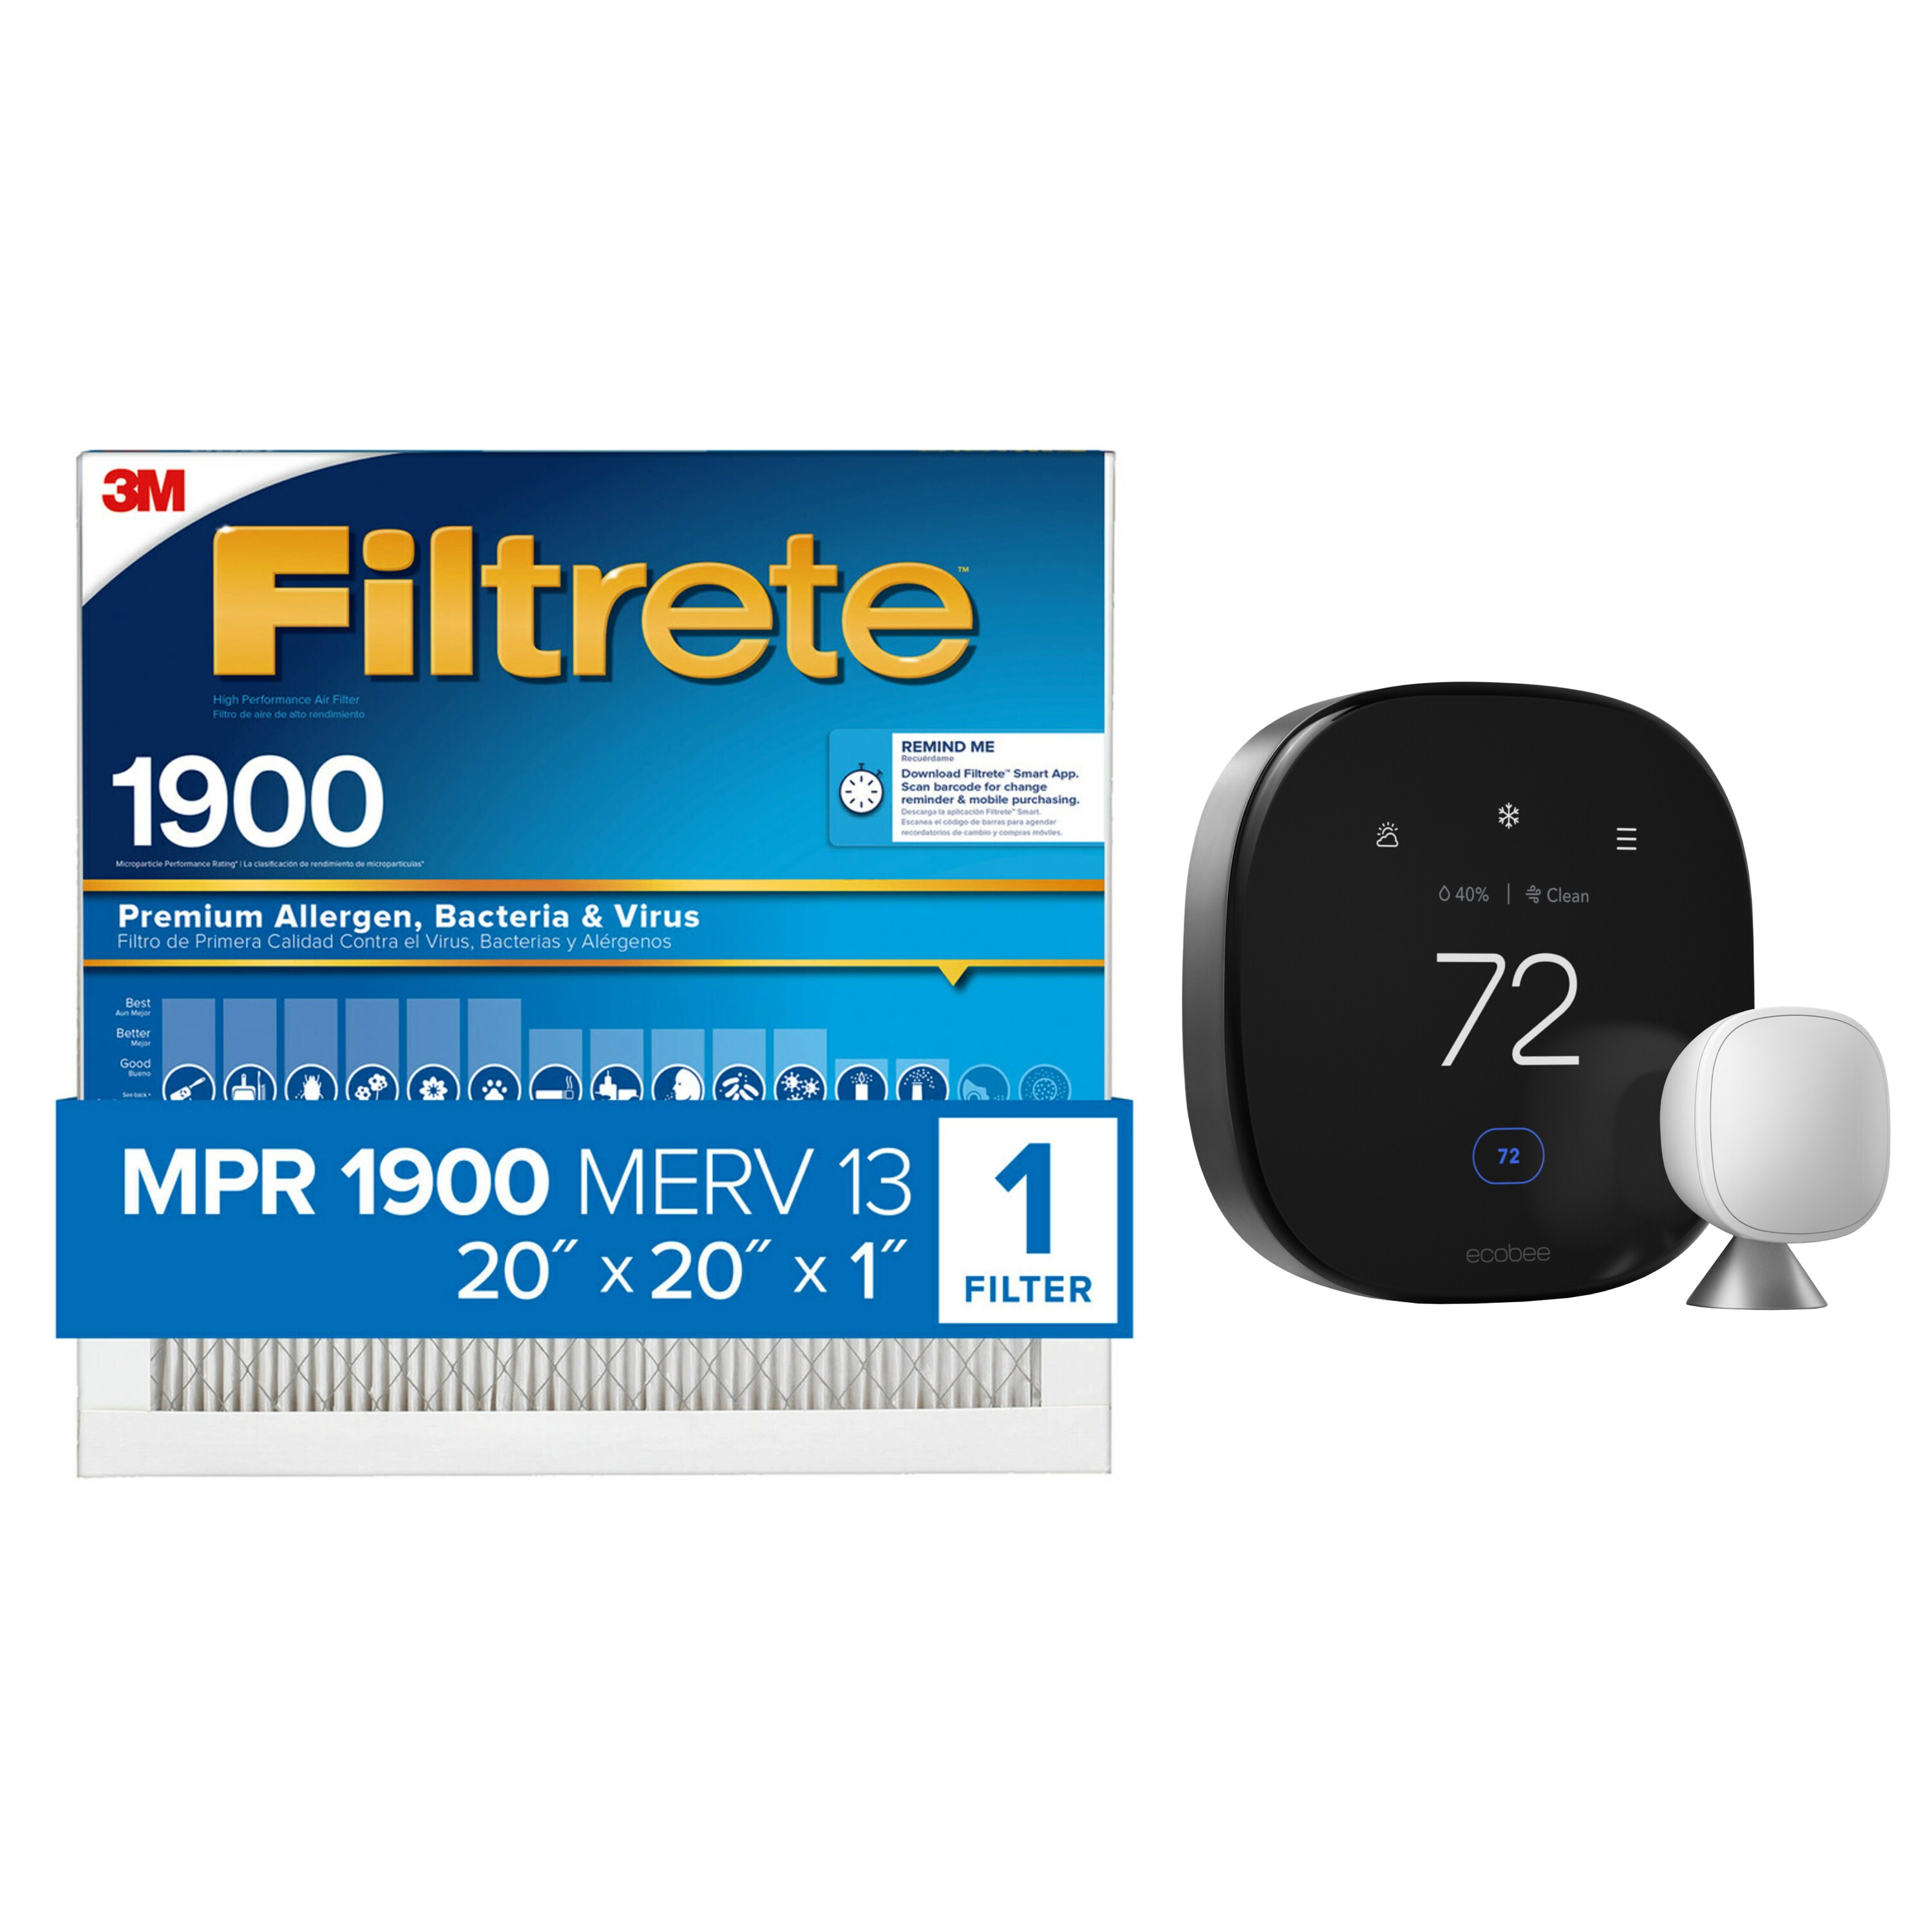 ecobee Smart Thermostat Premium Black Thermostat and Room Sensor with Wi-Fi  Compatibility in the Smart Thermostats department at